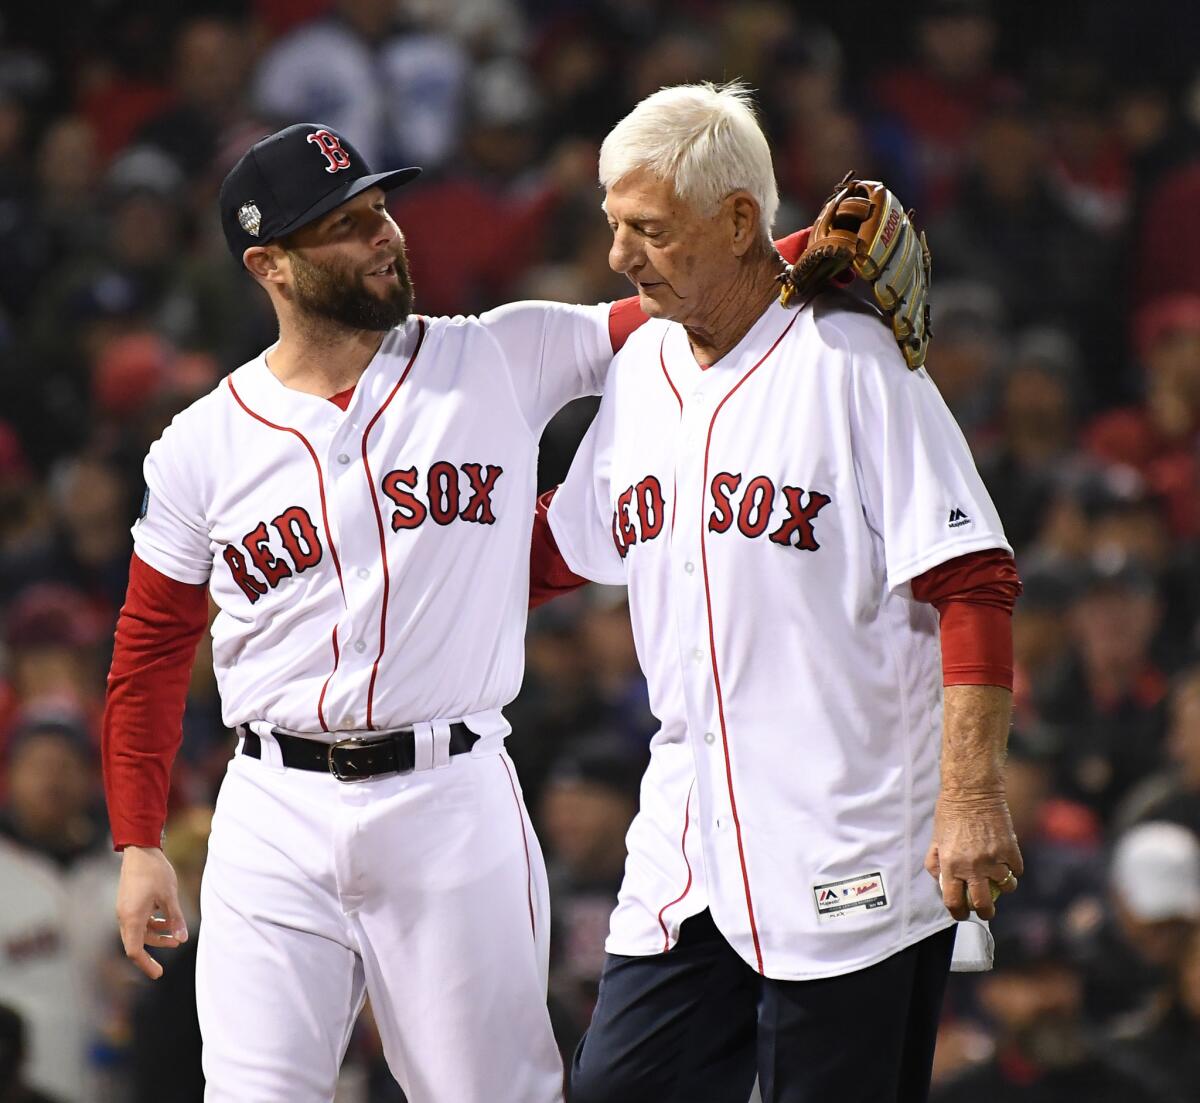 Boston Red Sox legend Carl Yastrzemski, right, with longtime Red Sox star Dustin Pedroia after throwing out the first pitch before the start of Game 1.